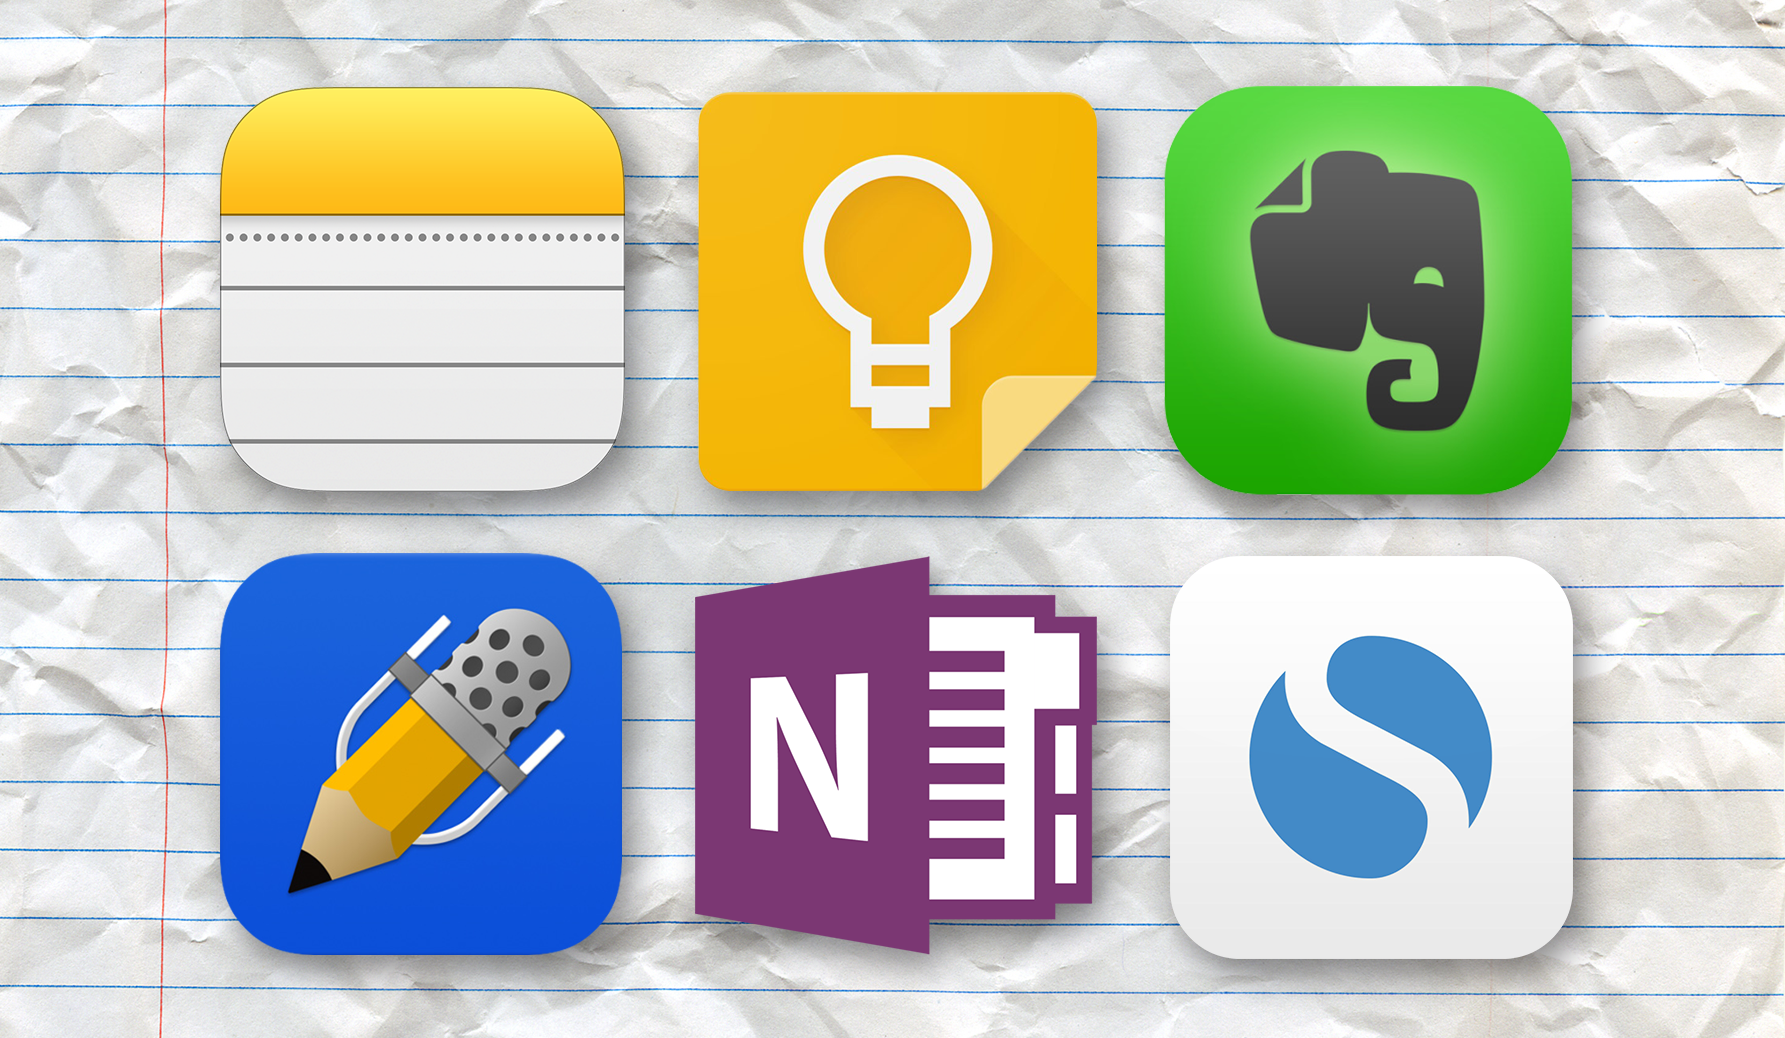 Comparative: who will win the epic battle of note-taking apps?